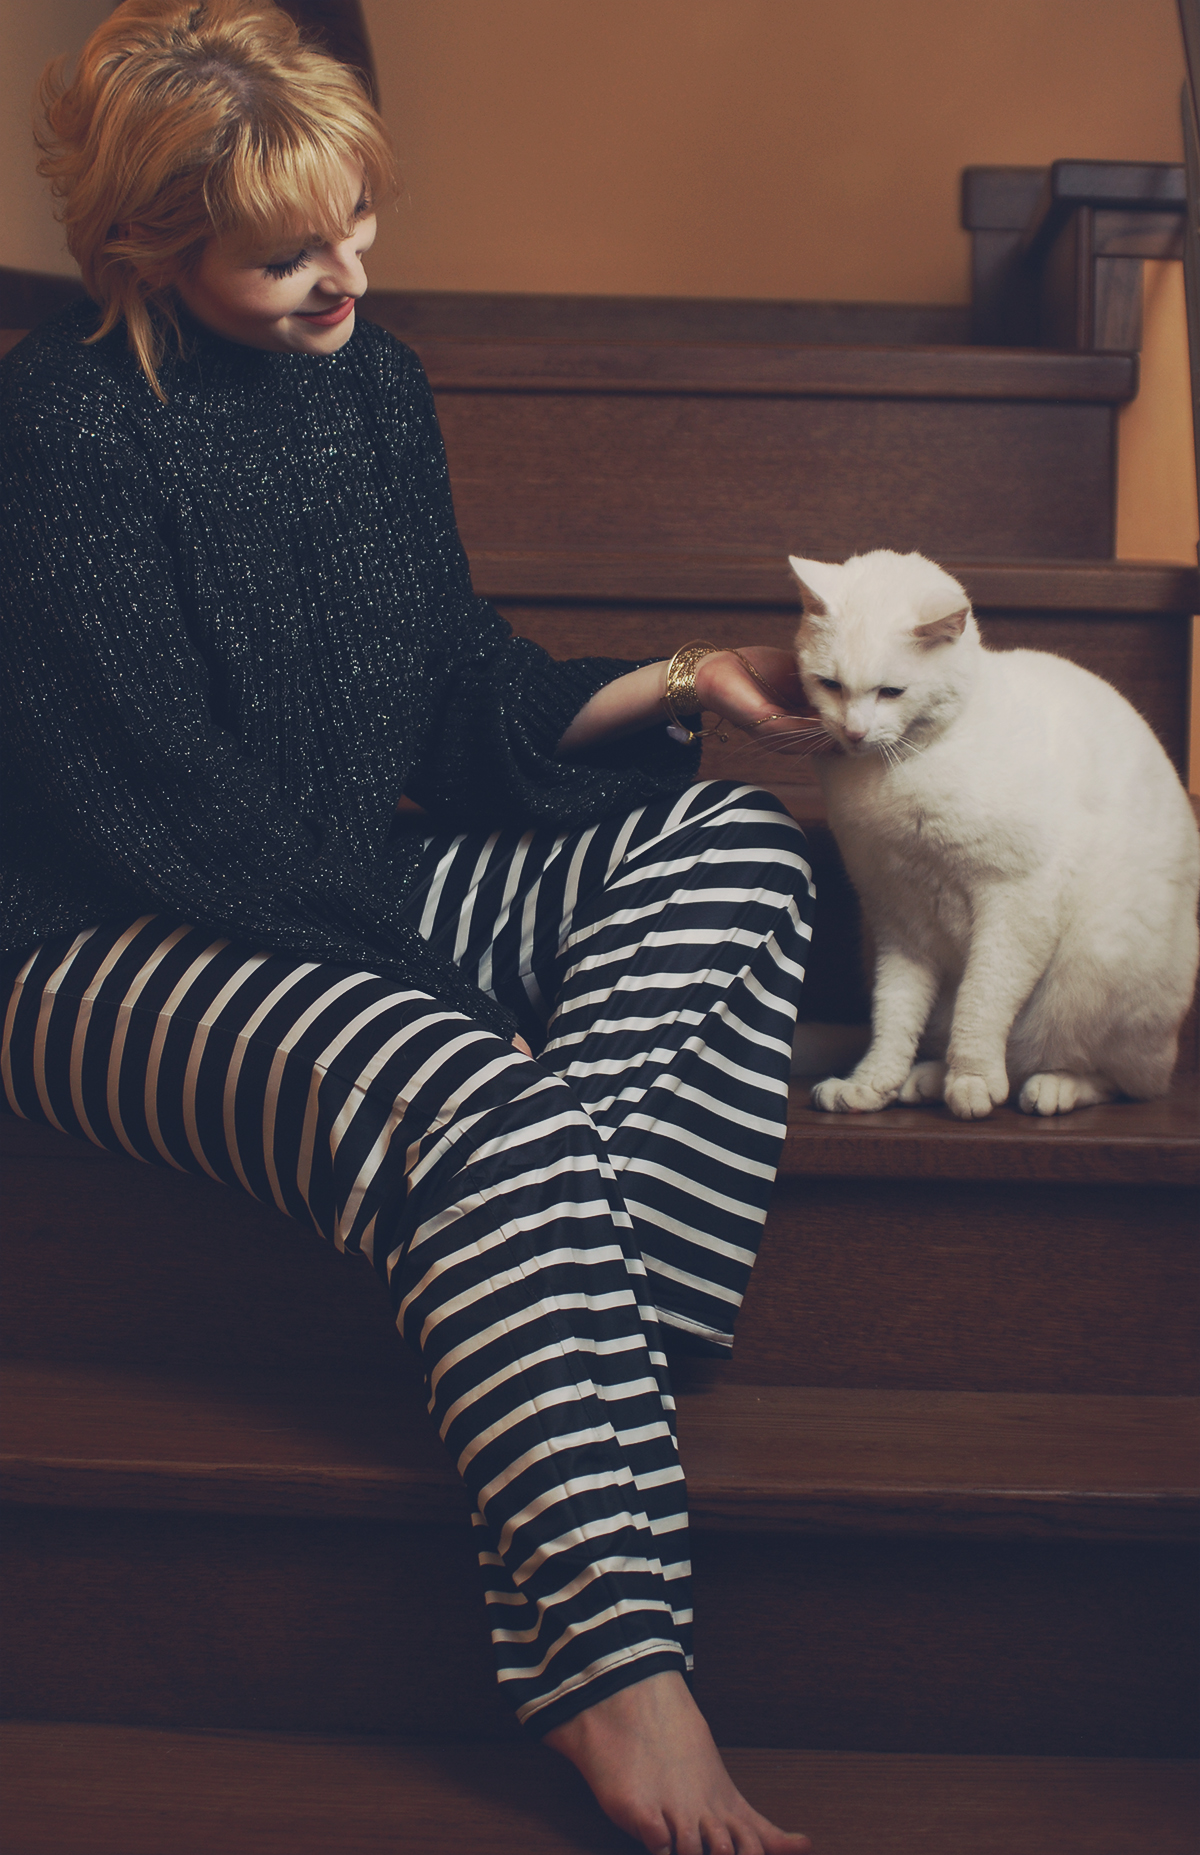 Dior vintage necklace worn as a bracelet, Rosegal stone bracelet, black sparkly sweater, black and white striped flare pants, short blonde bob with bangs, white cat, cute, lounging at home